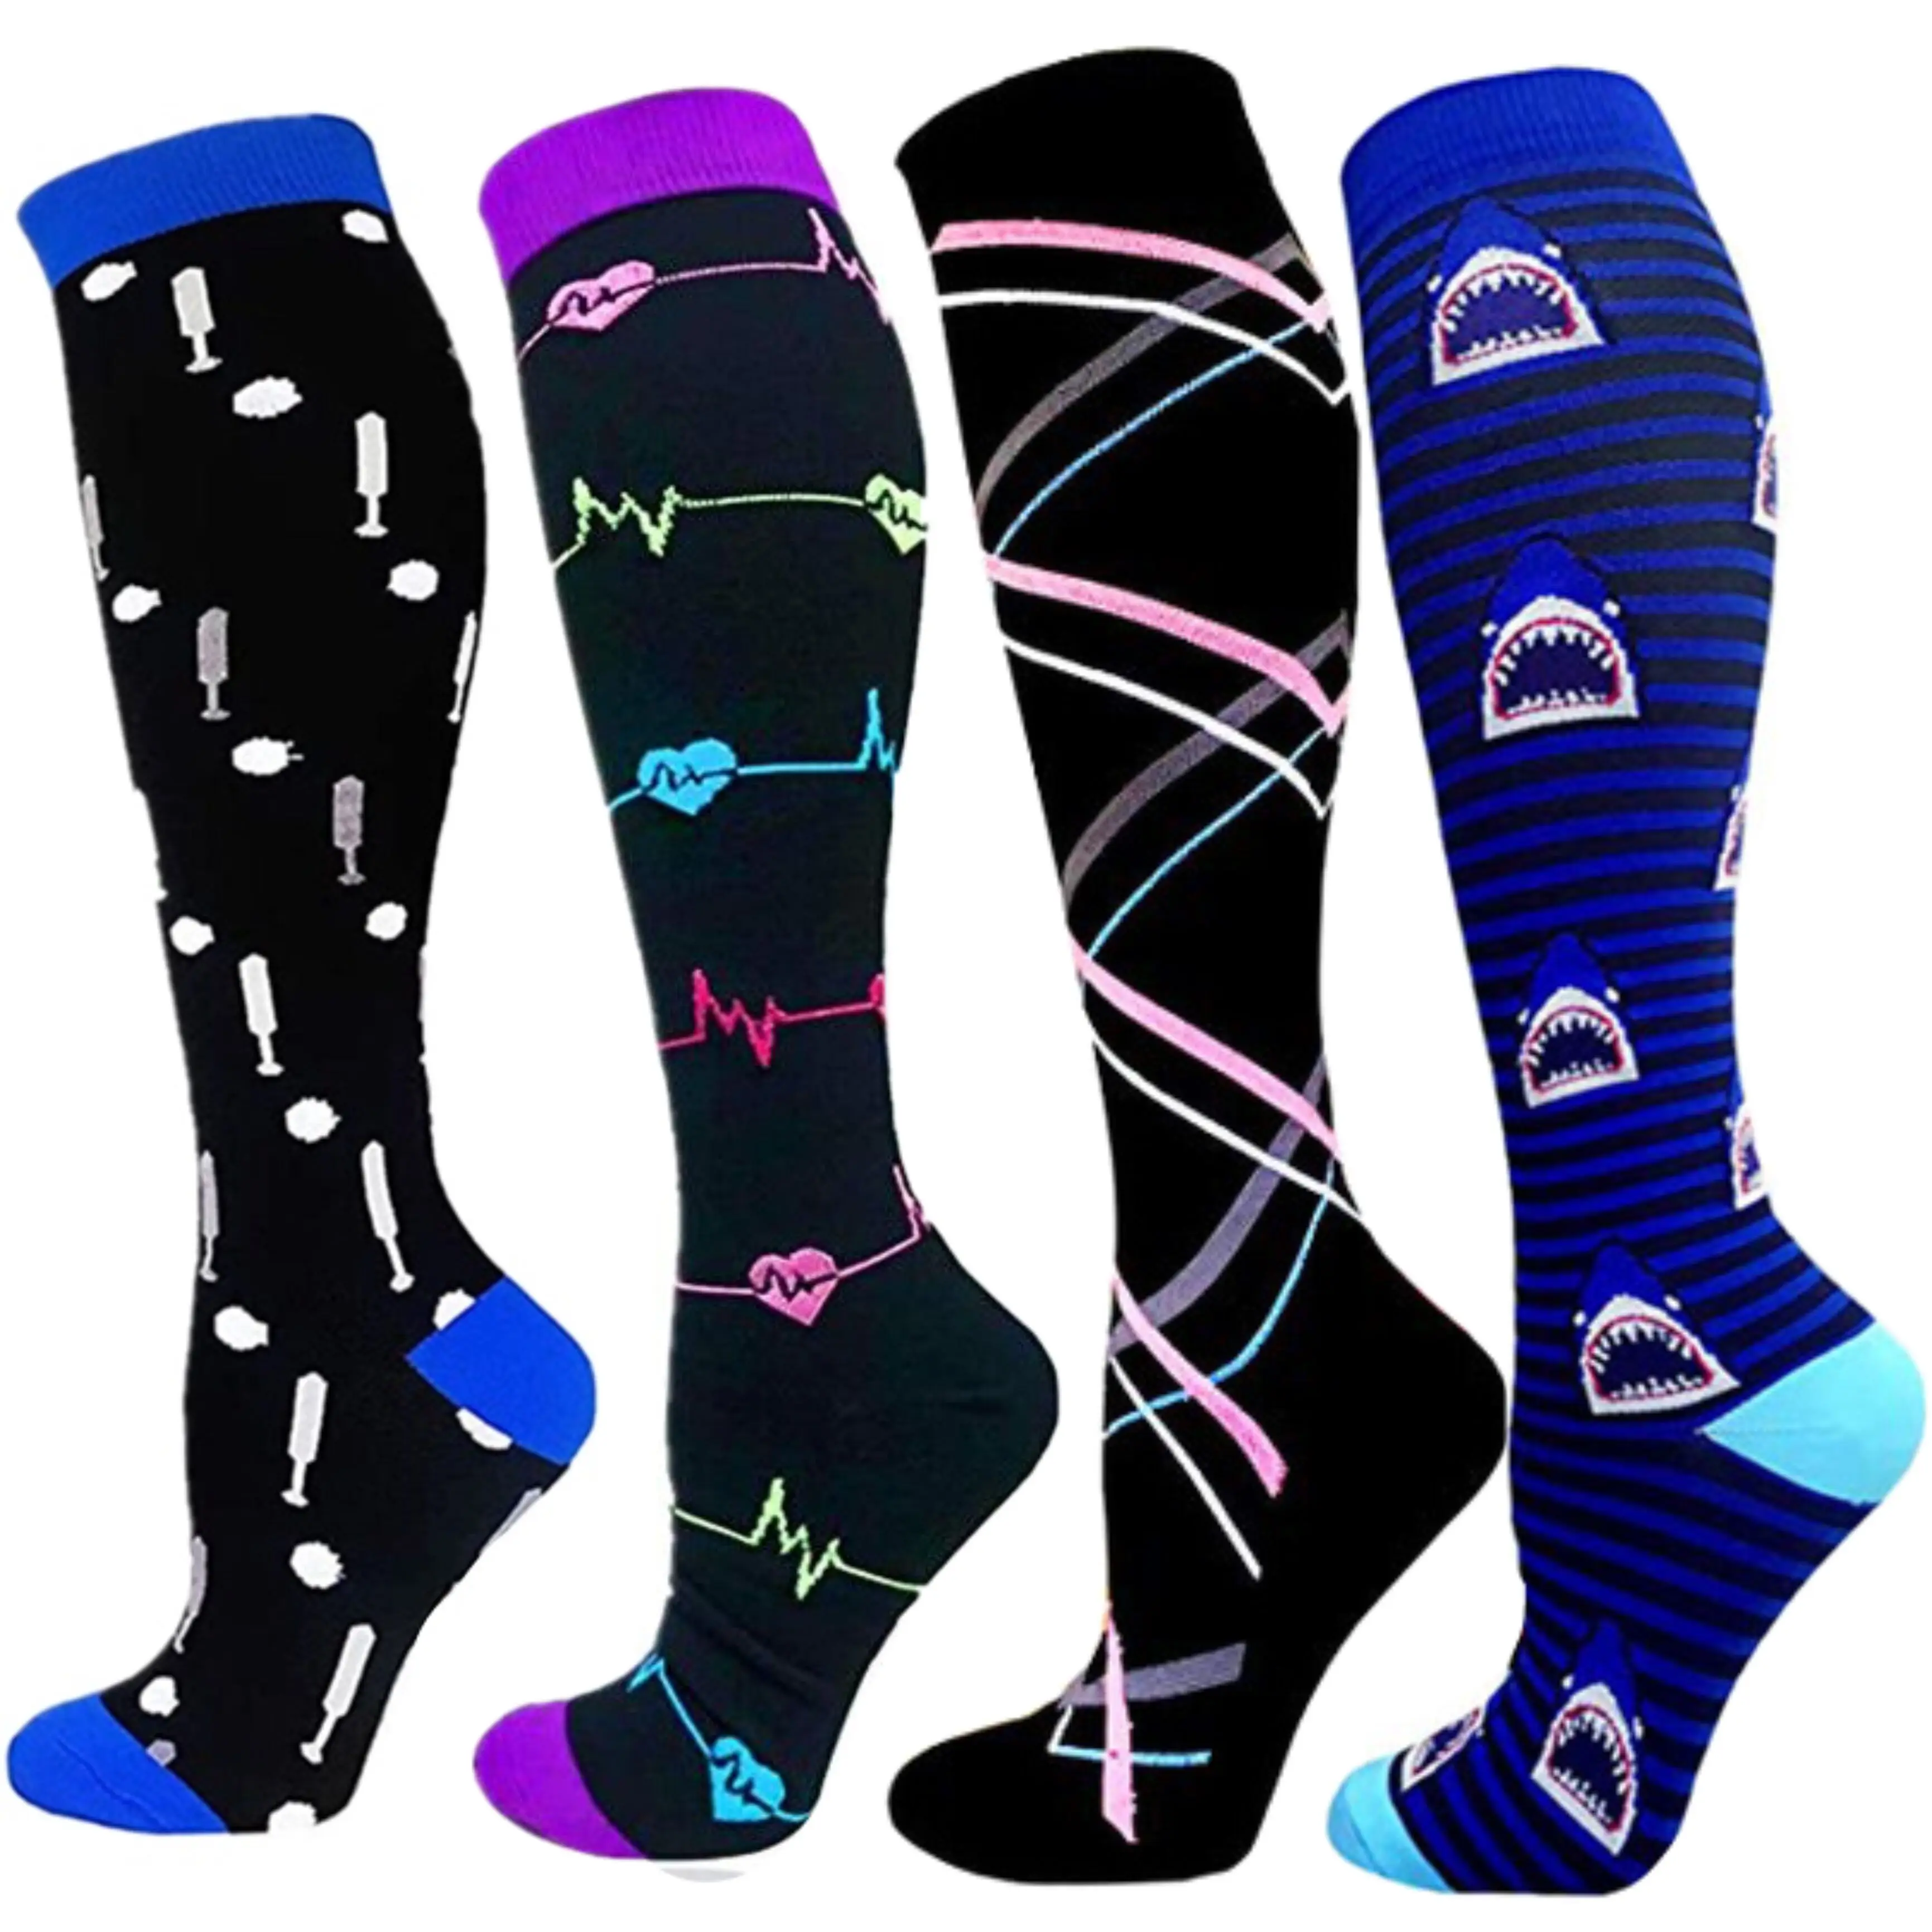 

Compression Stockings Running Cycling Hiking Socks Varicose Veins Socks Anti-swelling Stretch Outdoor Sports Compression Socks